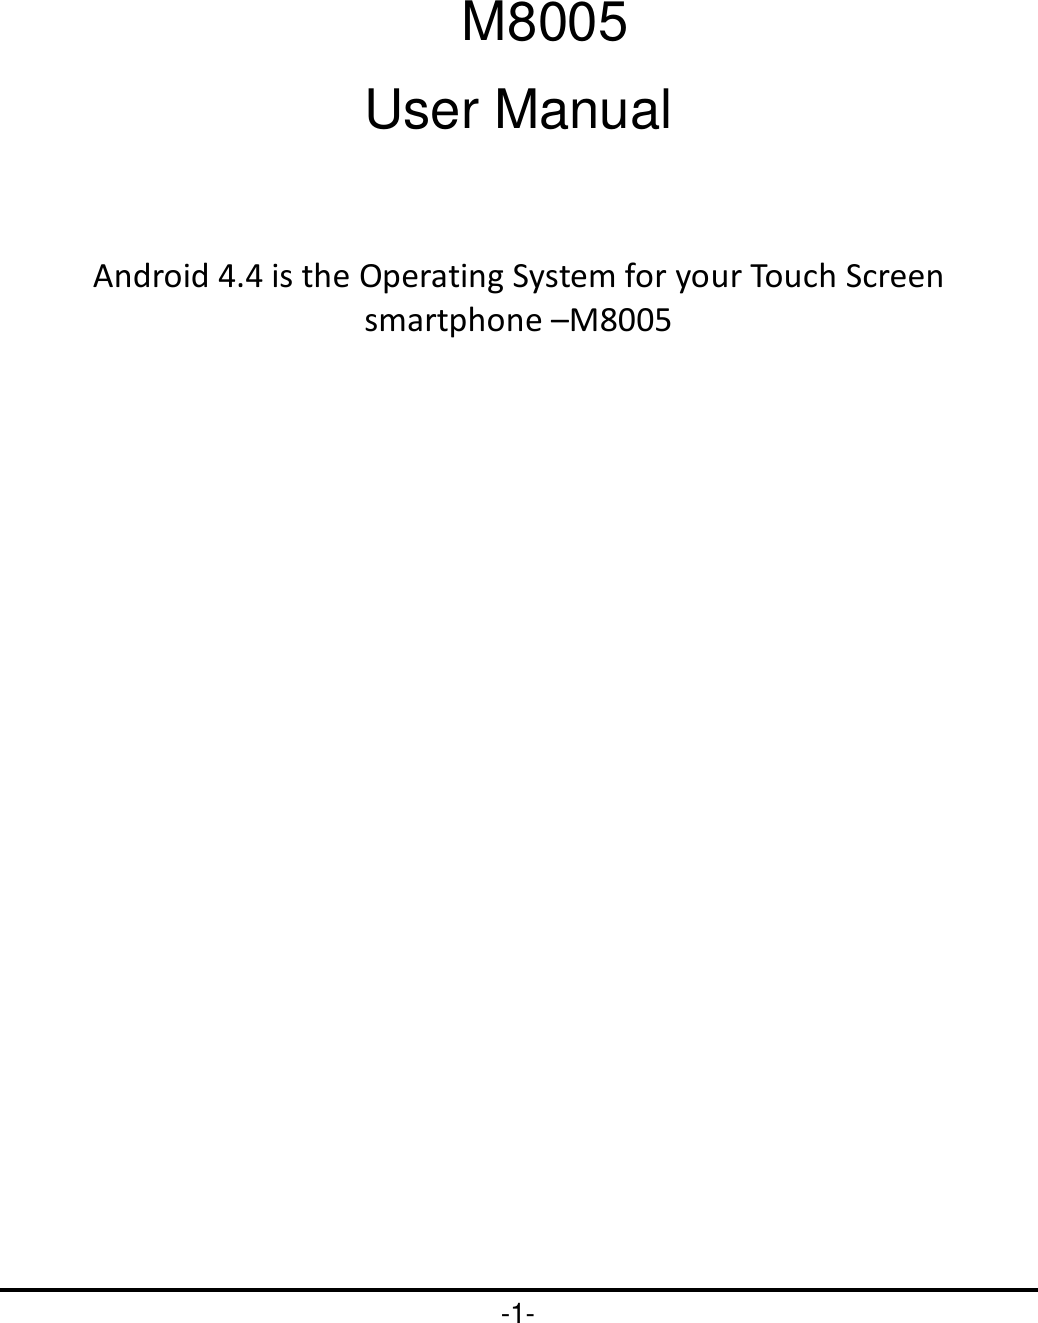 -1-        M8005                                  User Manual  Android 4.4 is the Operating System for your Touch Screen smartphone –M8005 